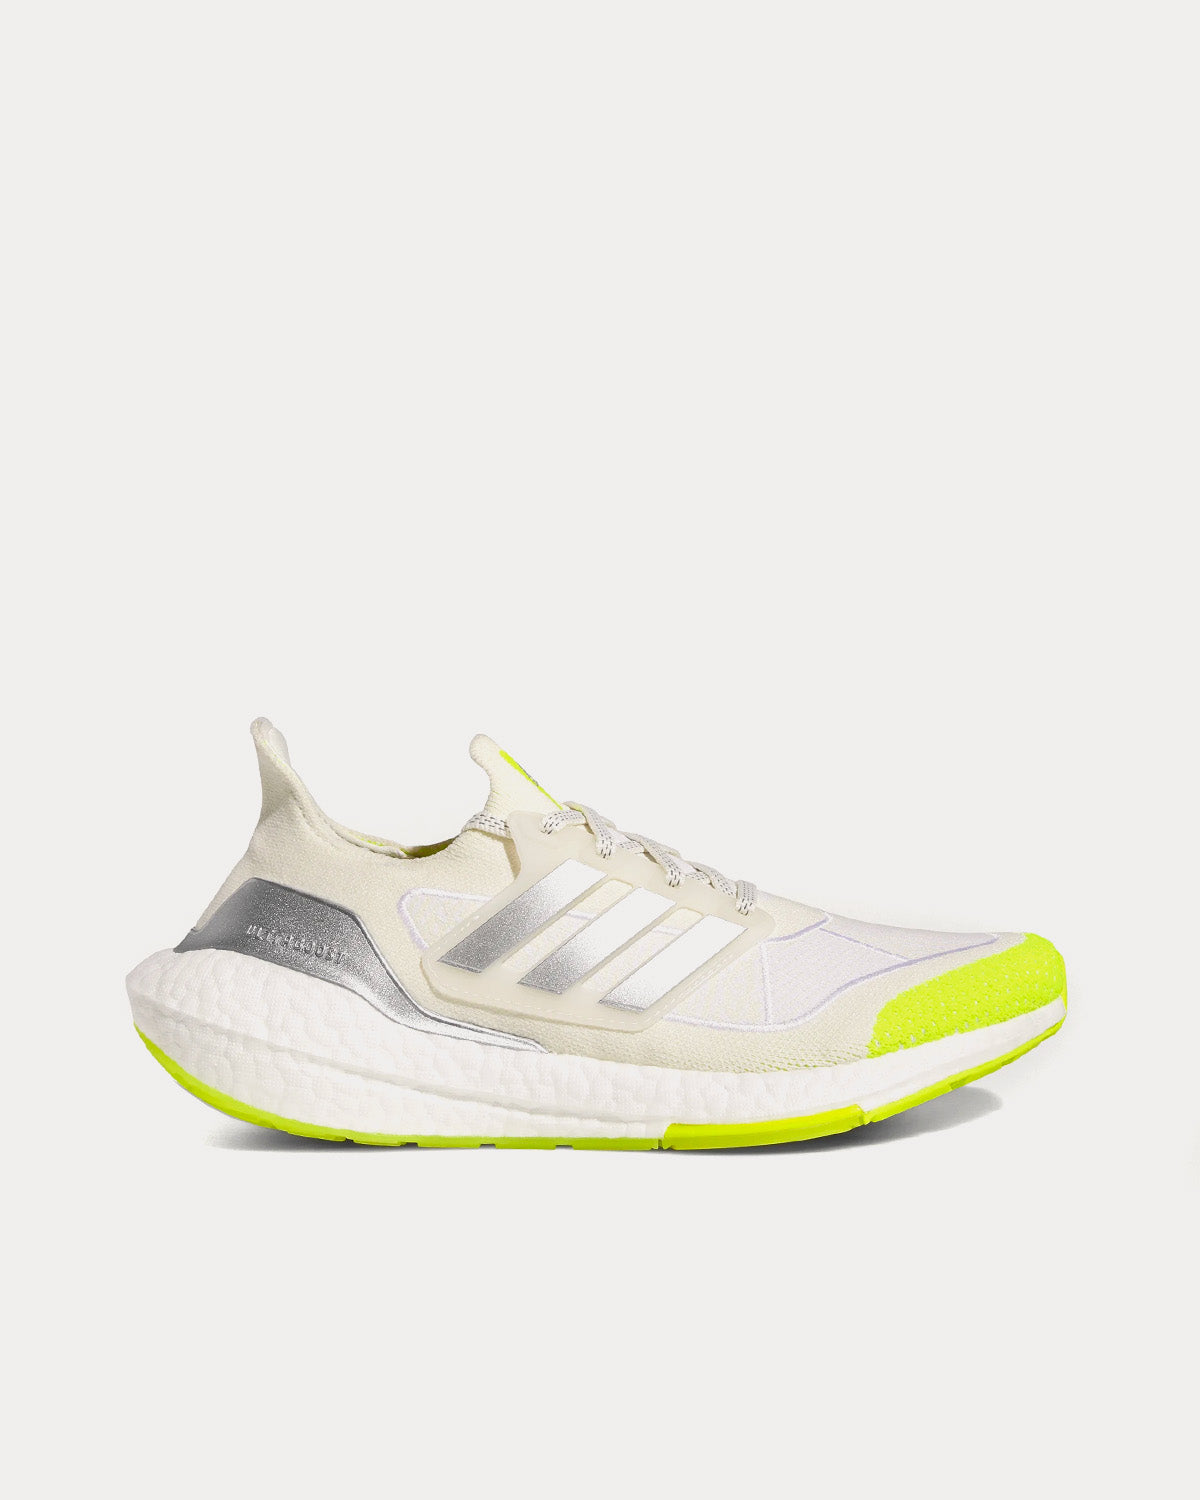 Adidas x Ivy Park - Ultraboost Off White / Silver Metallic / Cloud White Running Shoes